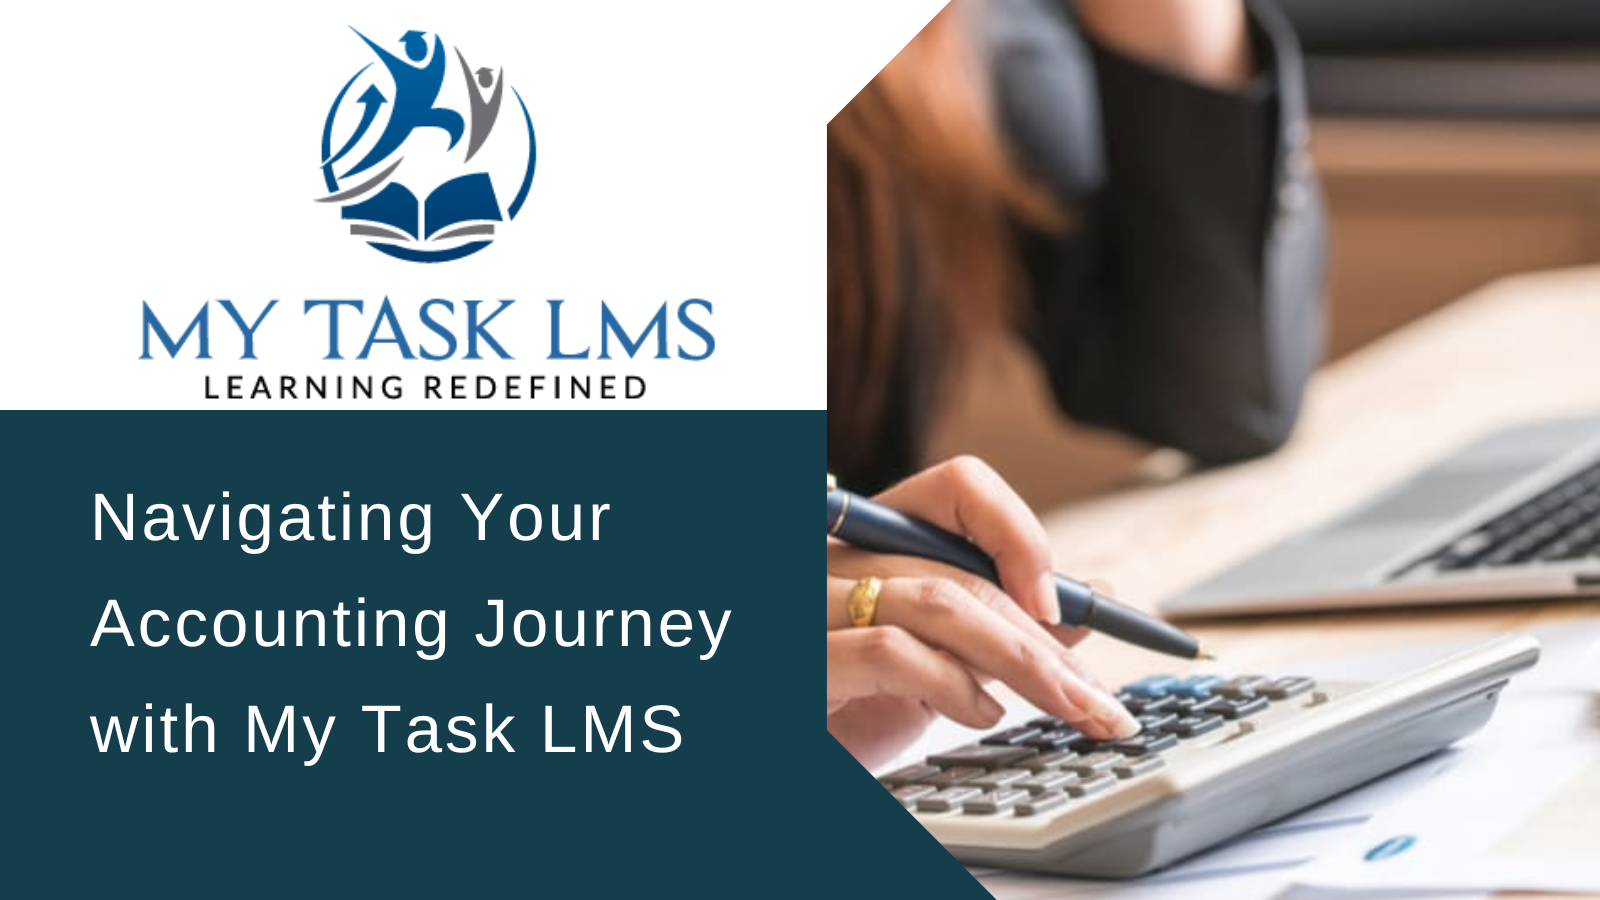 Navigating Your Accounting Journey with My Task LMS